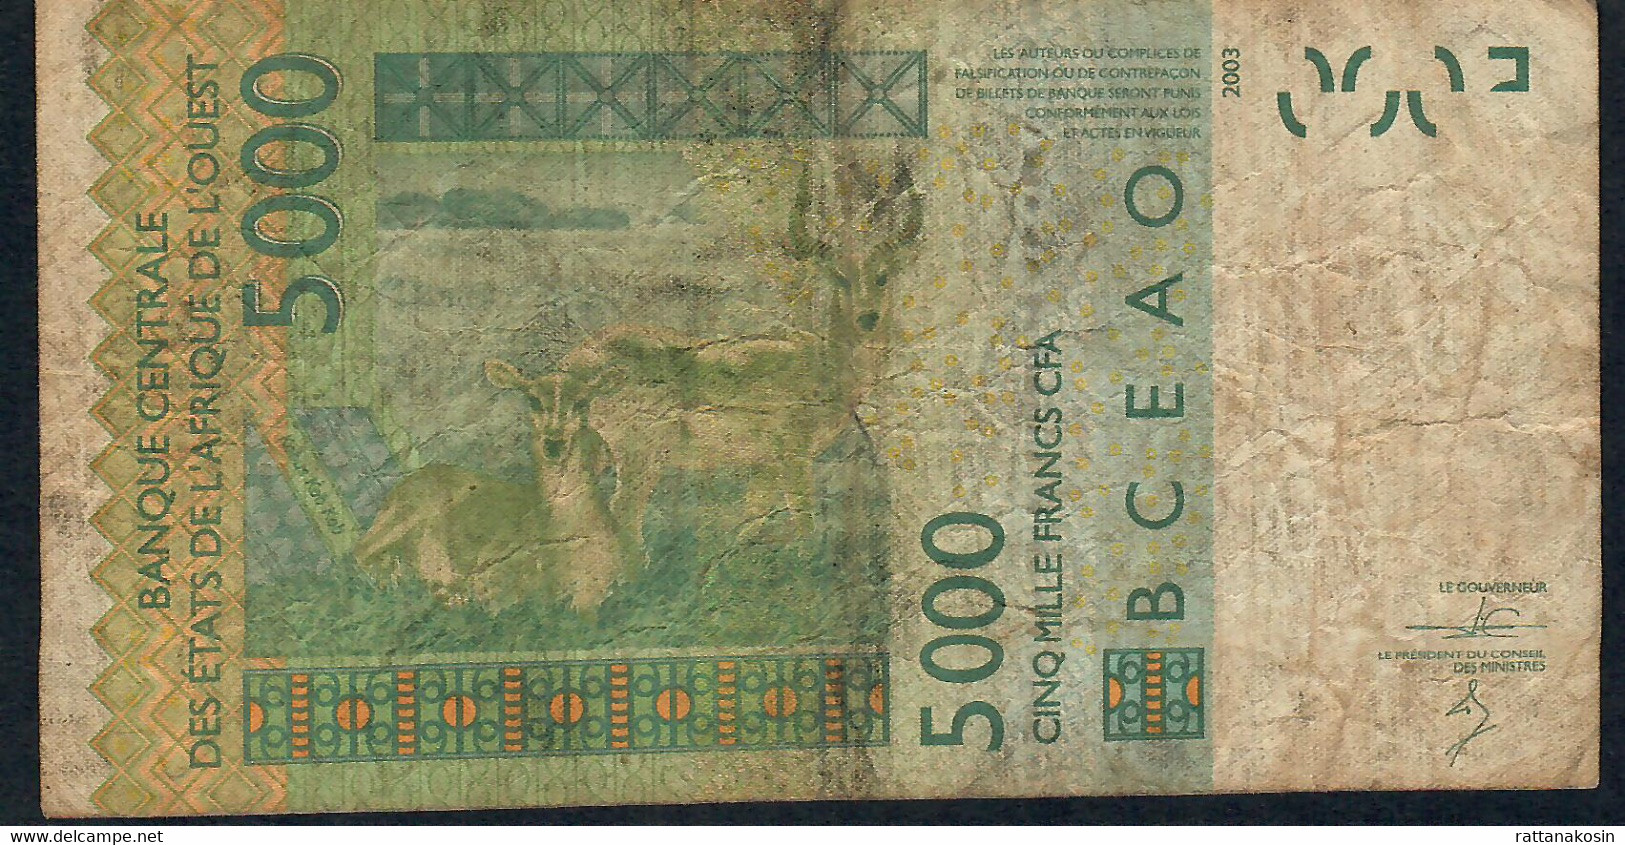 W.A.S. GUINEA BISSAU P917Sn 5000 FRANCS (20)14 2014  DUSTY NO P.h. ! FINE - West African States